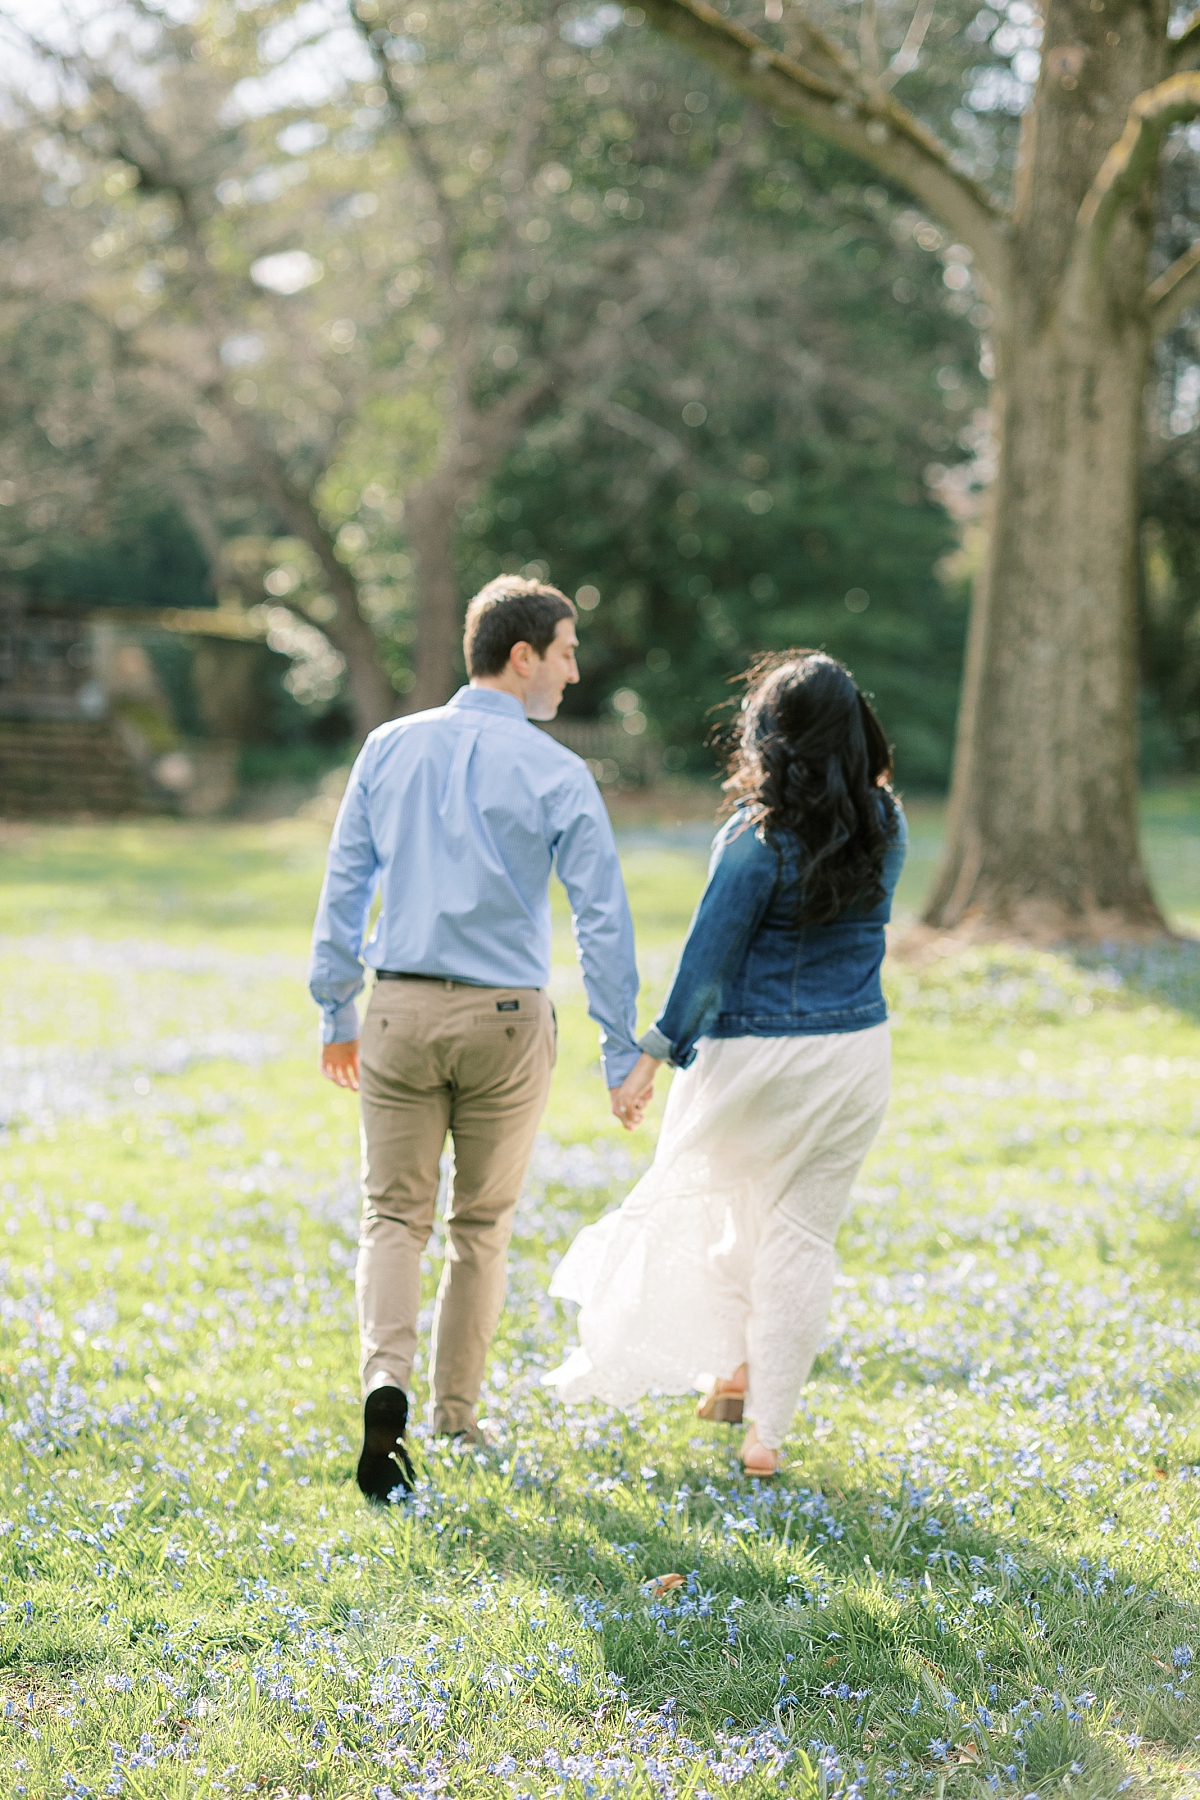 lancaster county, central pa, pennsylvania, wedding photographer, engagement session, longwood gardens, spring engagement